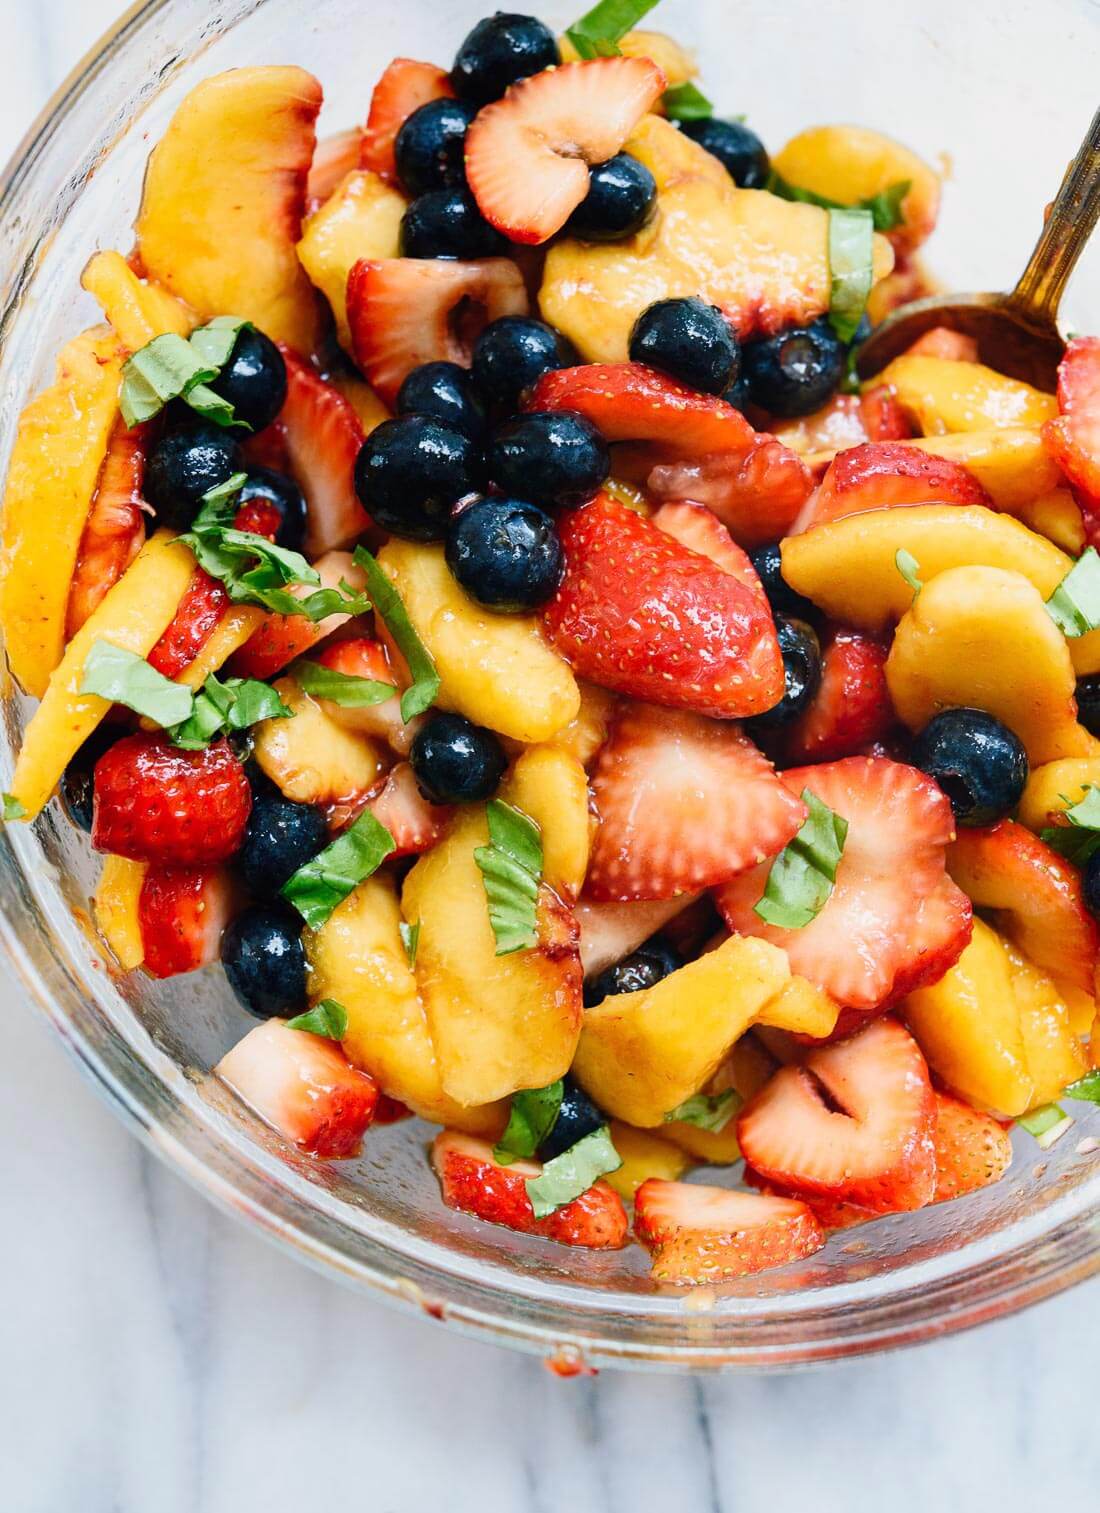 Take advantage of ripe summer fruit to make this simple summer fruit salad! Peaches, strawberries, blueberries, and balsamic vinegar make the best fruit salad. cookieandkate.com